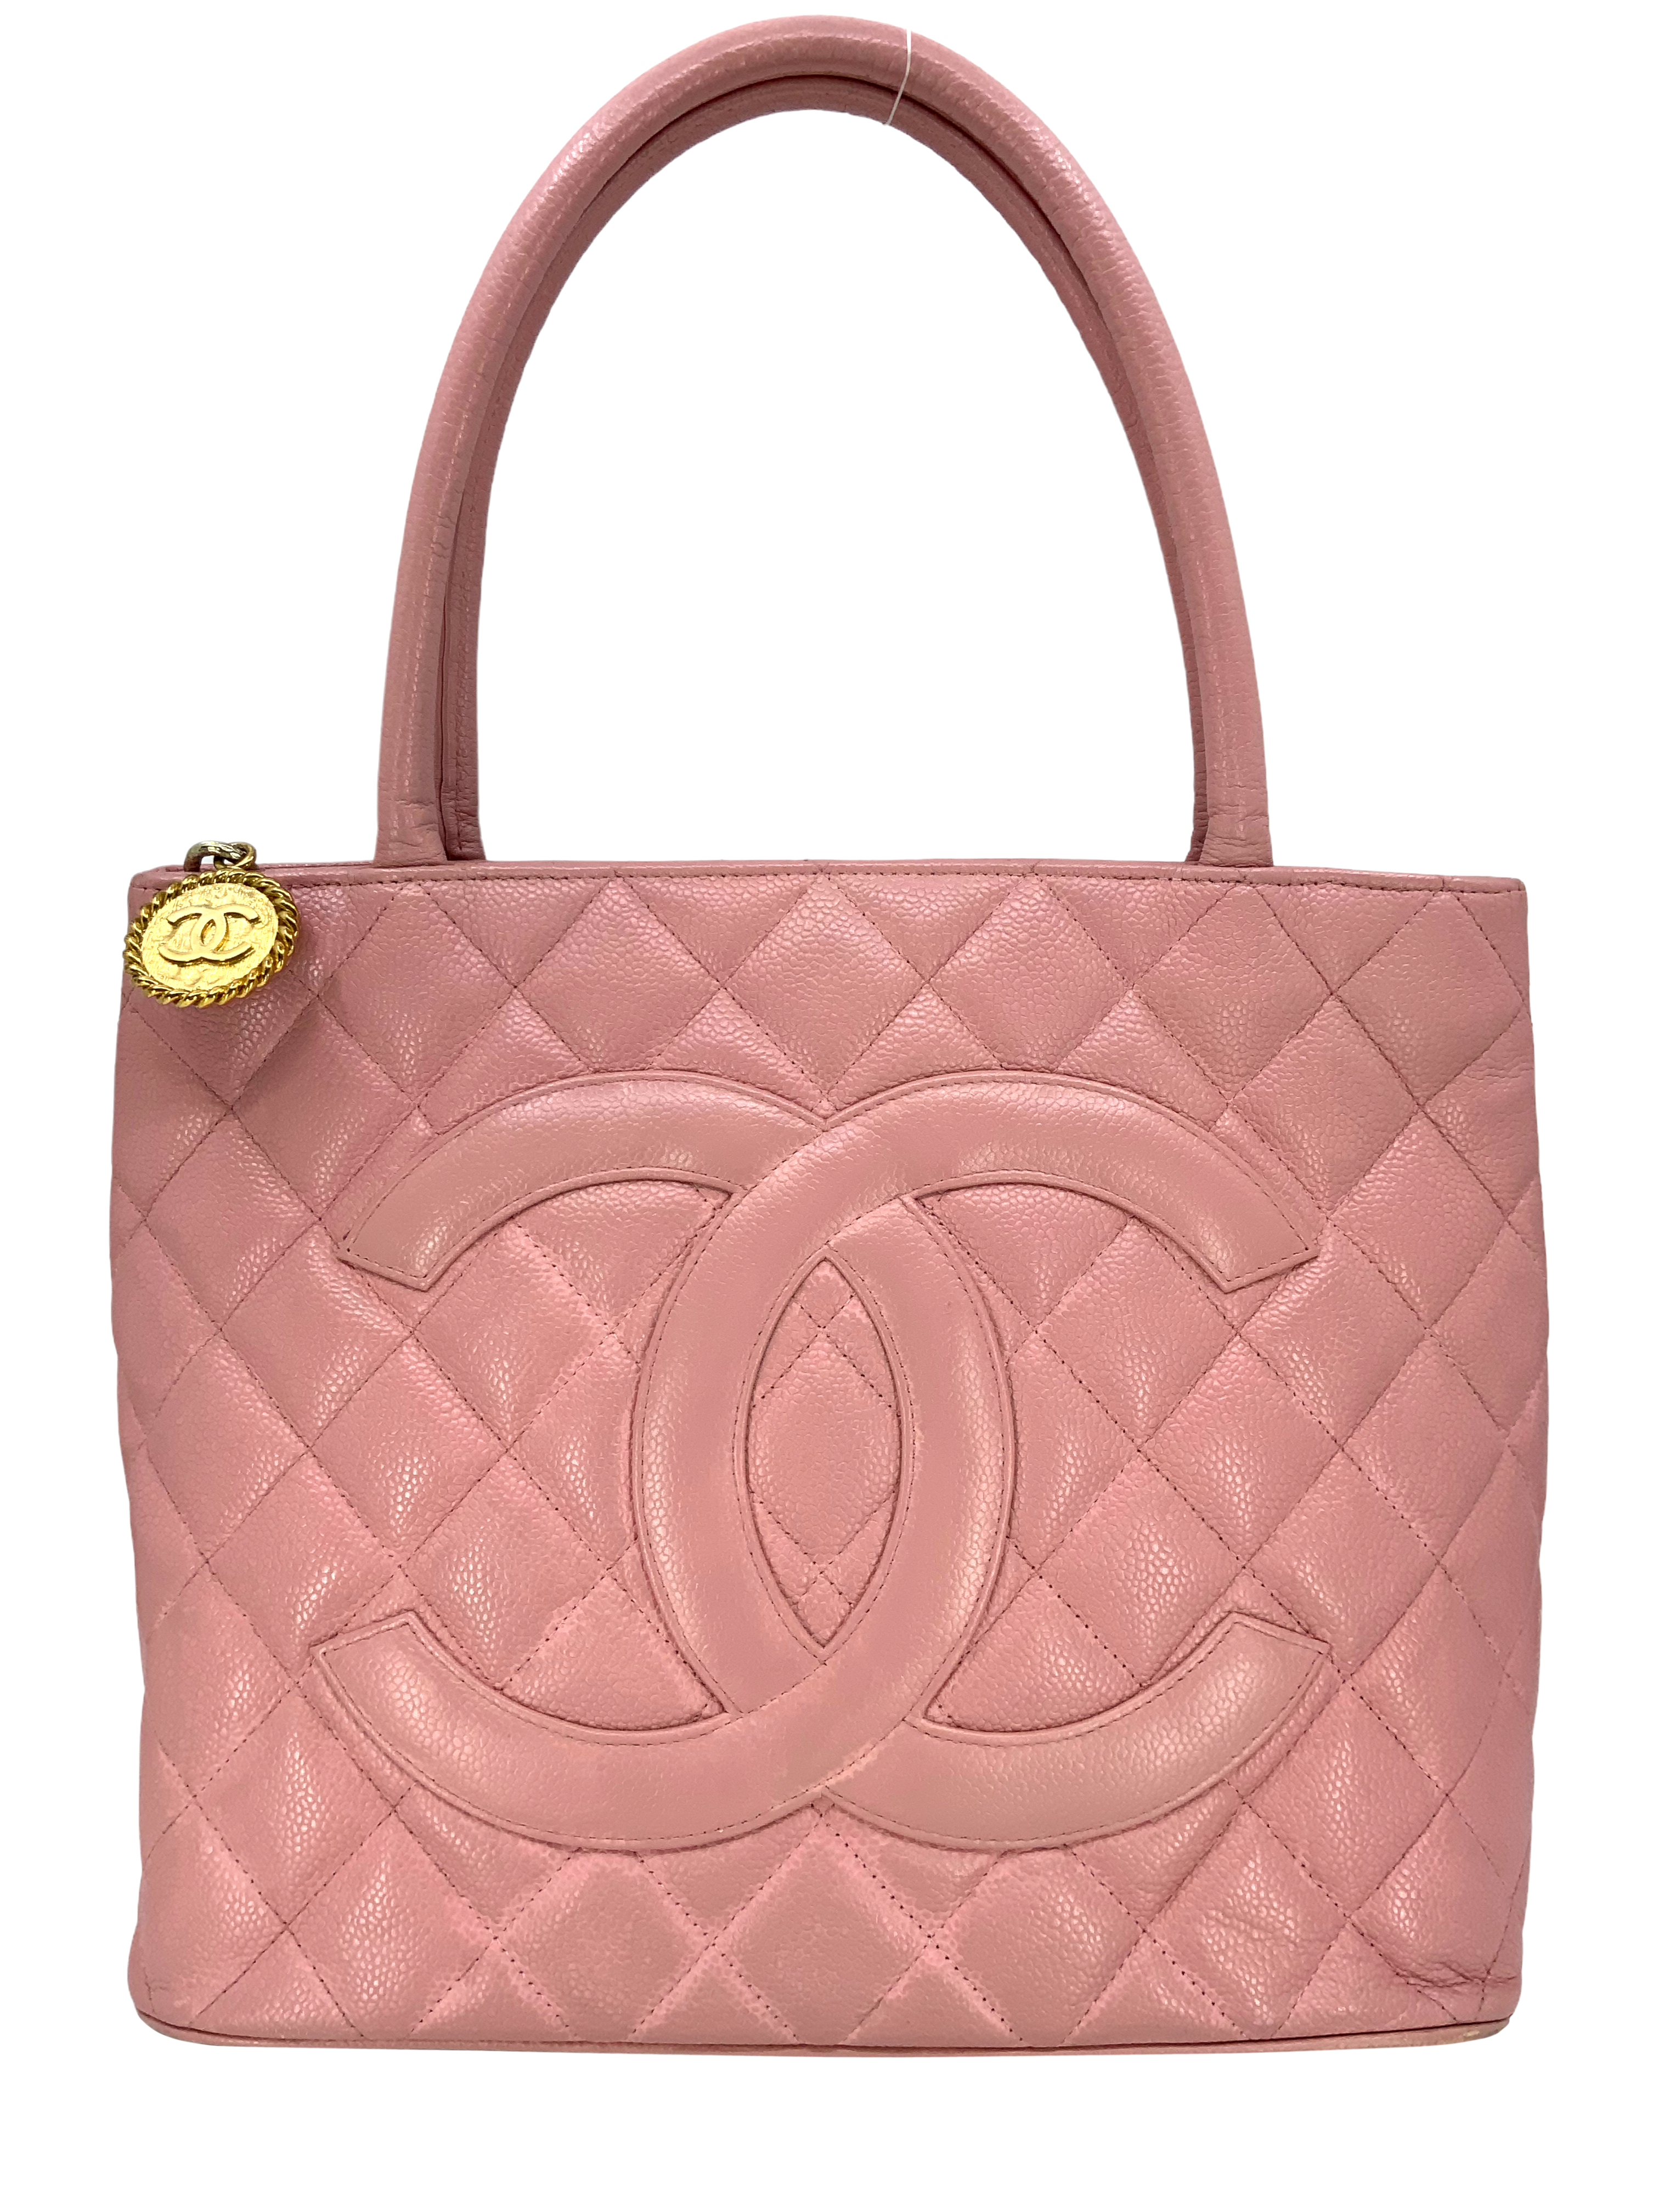 CHANEL Calfskin Quilted Large Duffle Bag Pink 105006